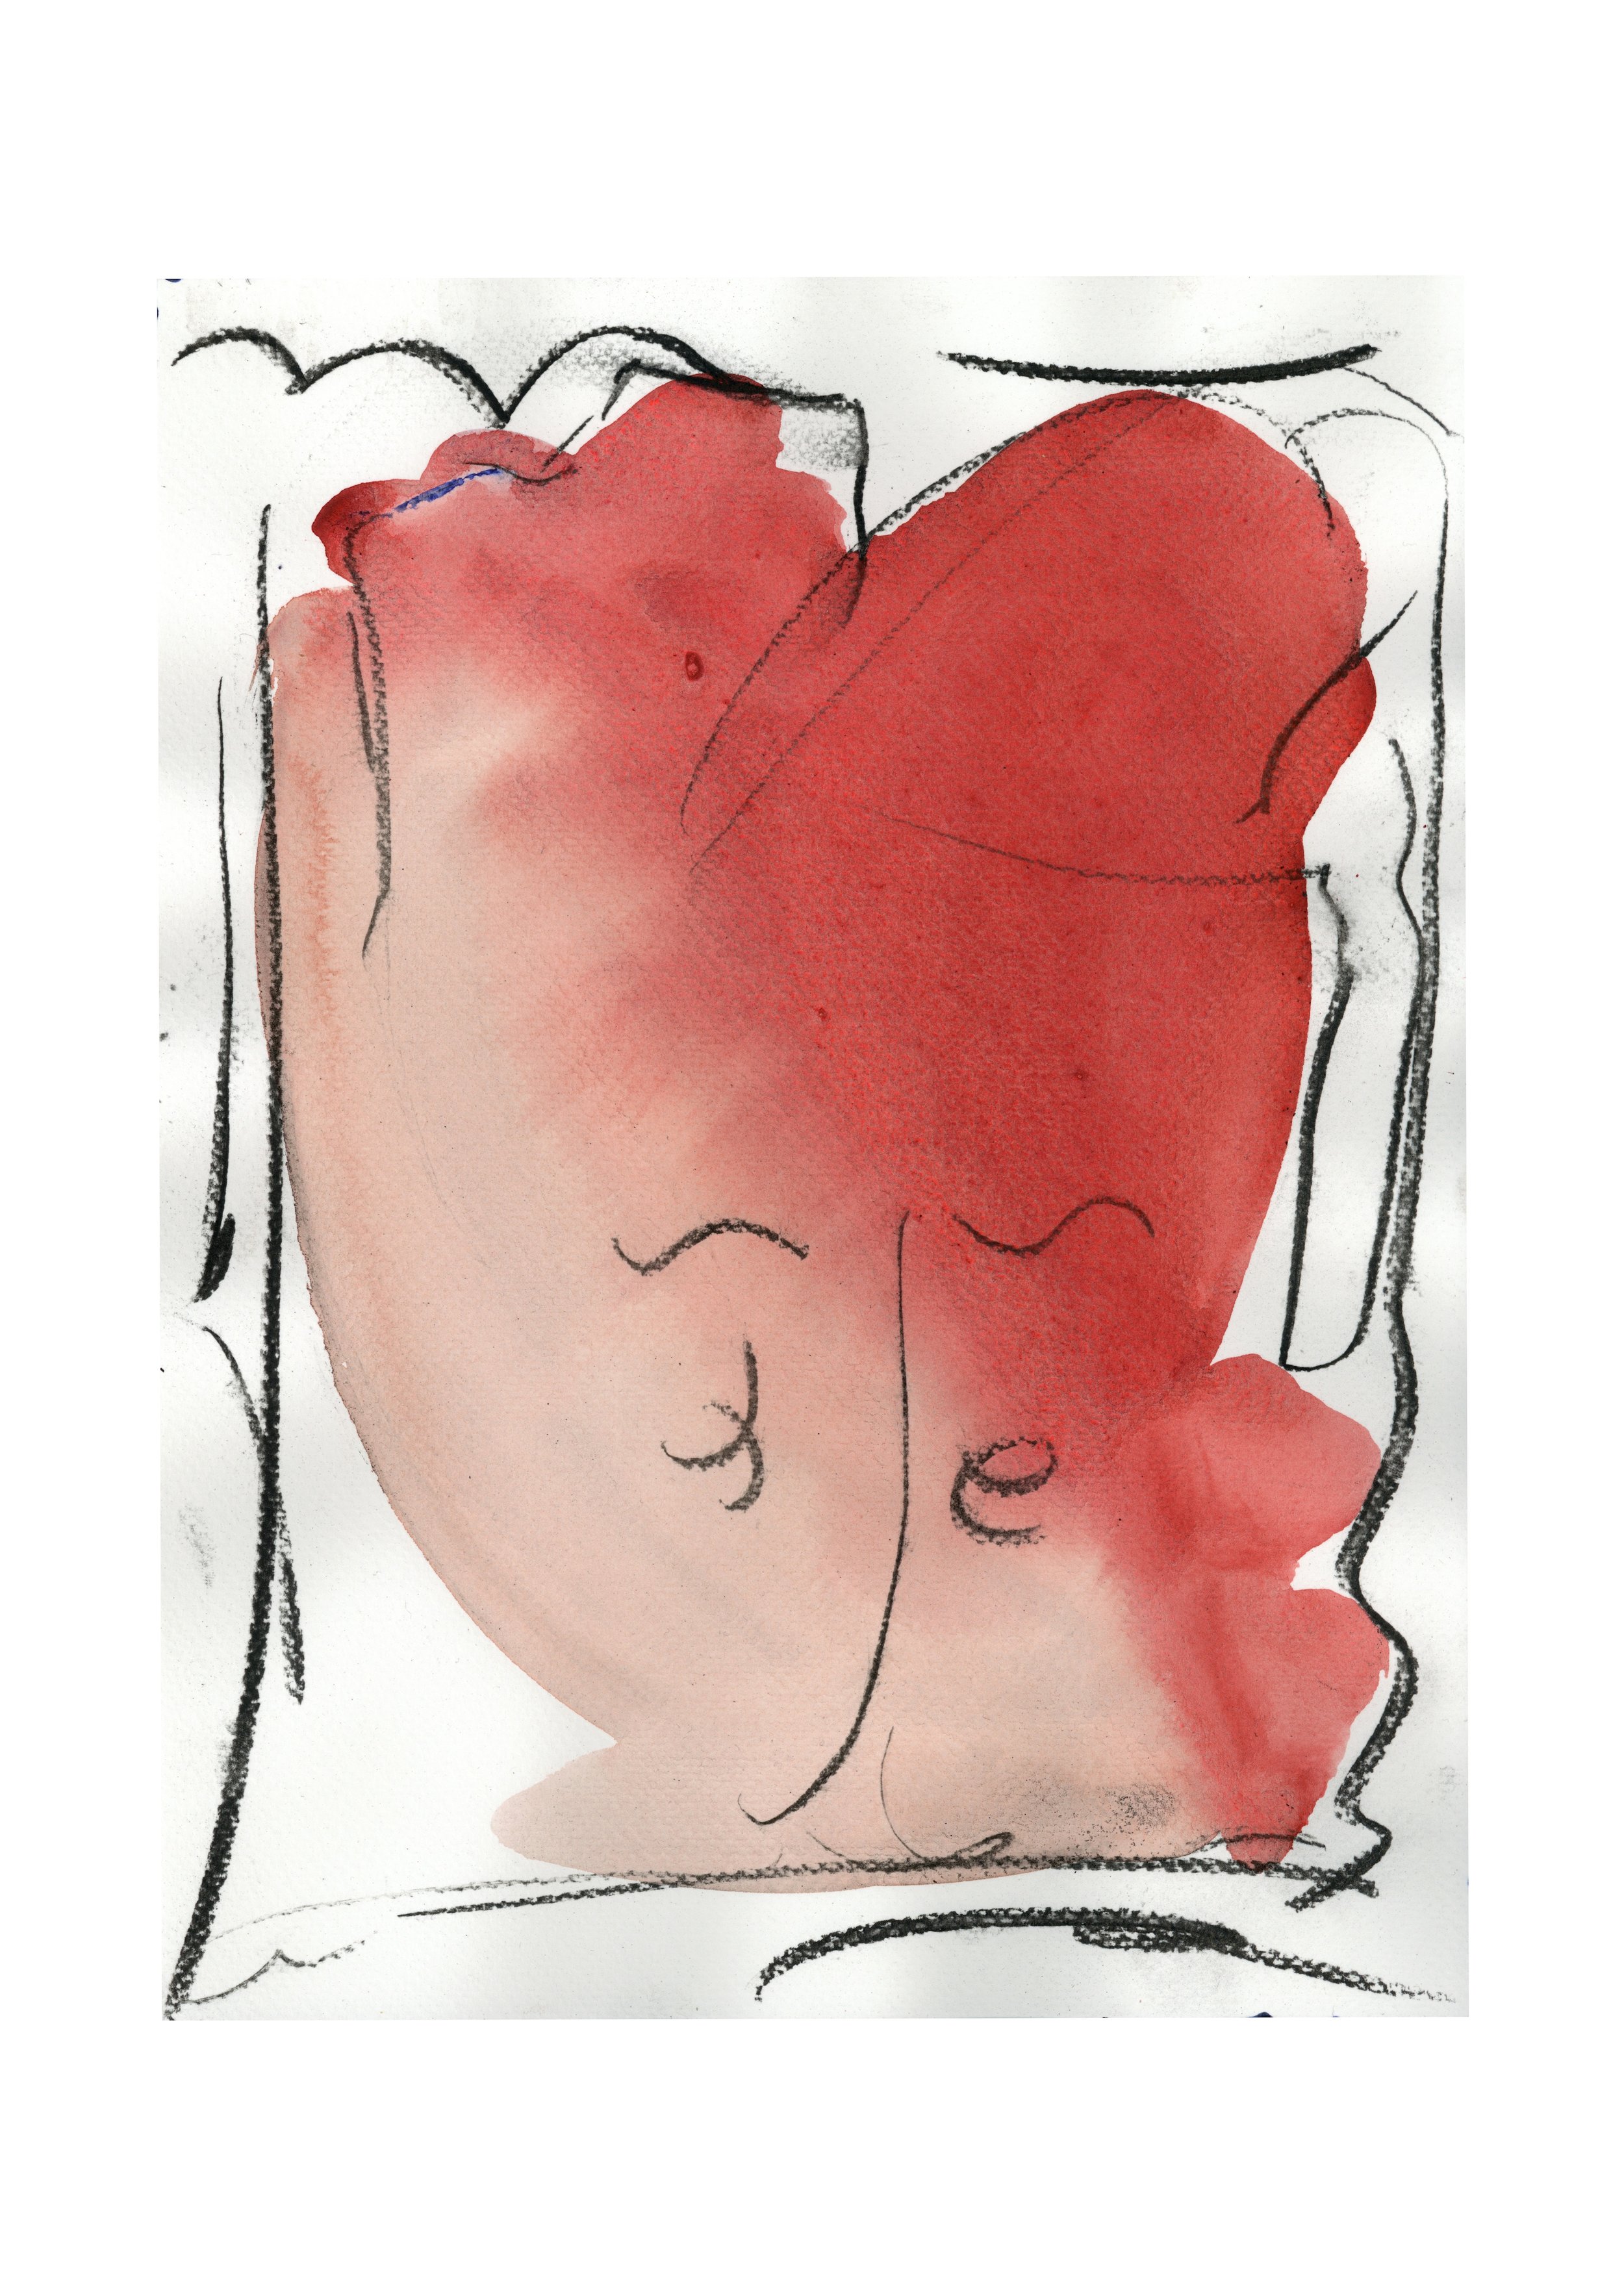   Torso (Blush)   2019  Acrylic and charcoal on watercolour paper  24 x 32 cm   